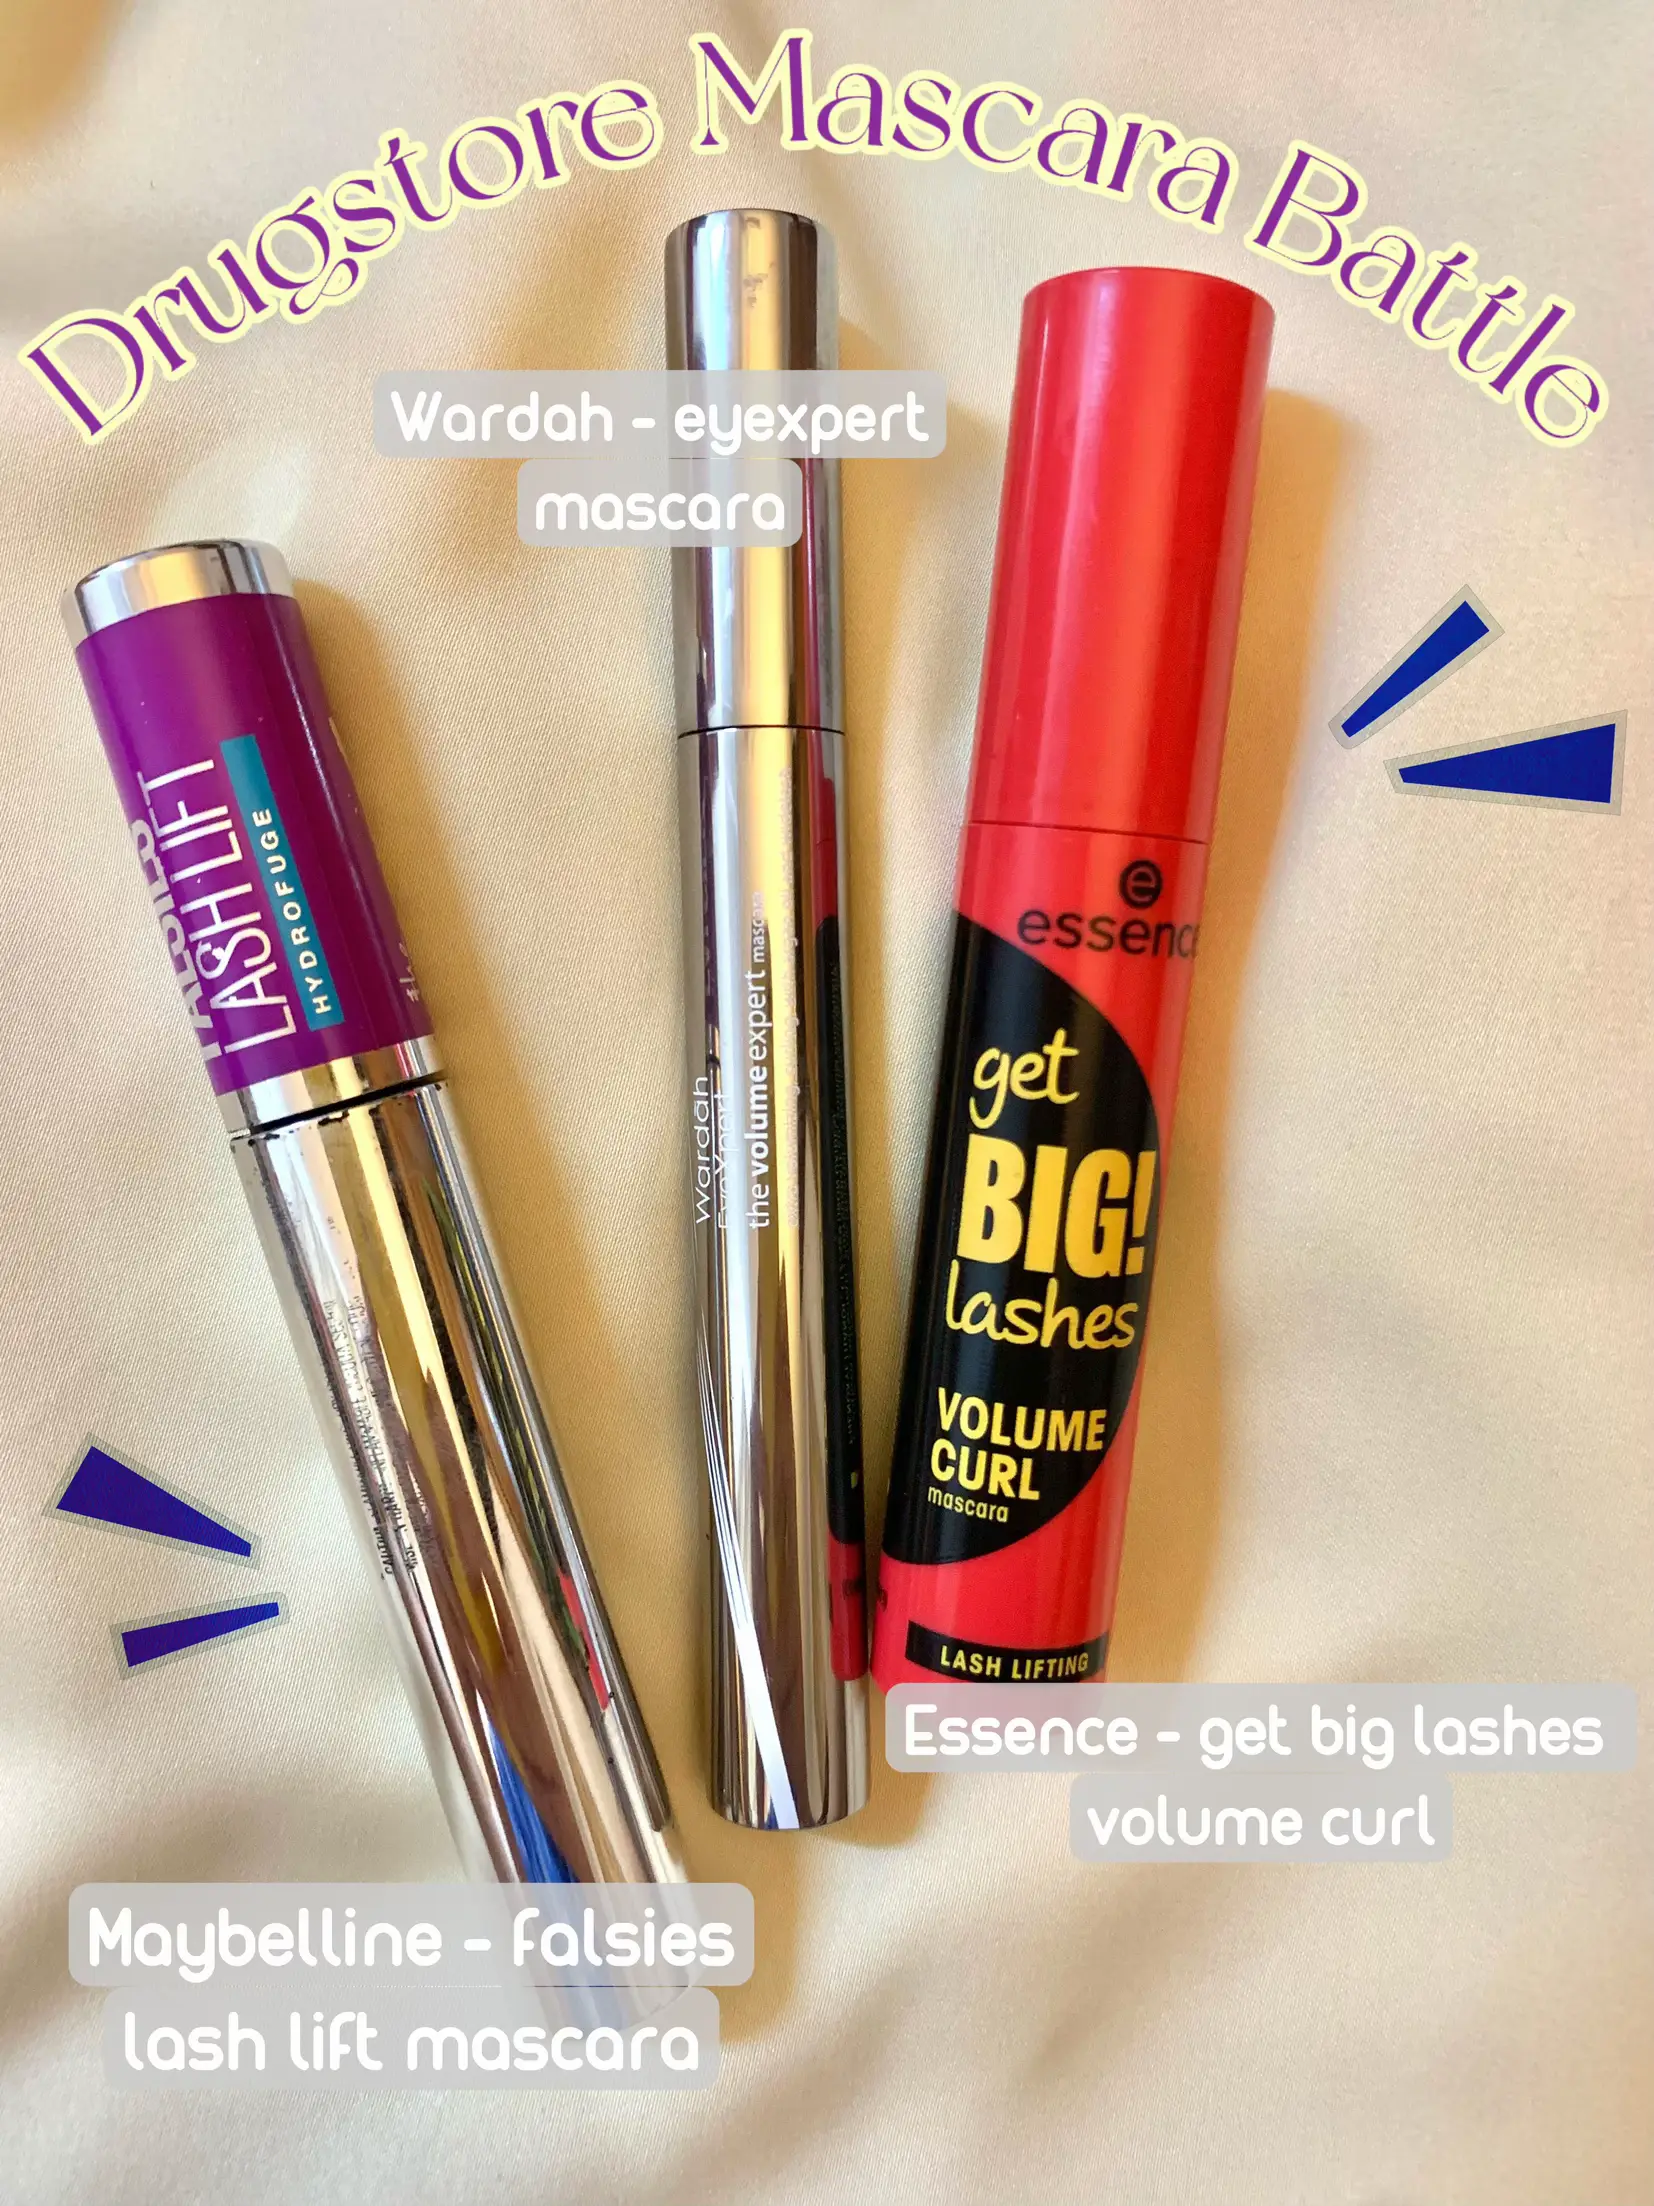 3 drugstore mascara works perfectly! | Gallery posted by Fatinfaqhihah |  Lemon8